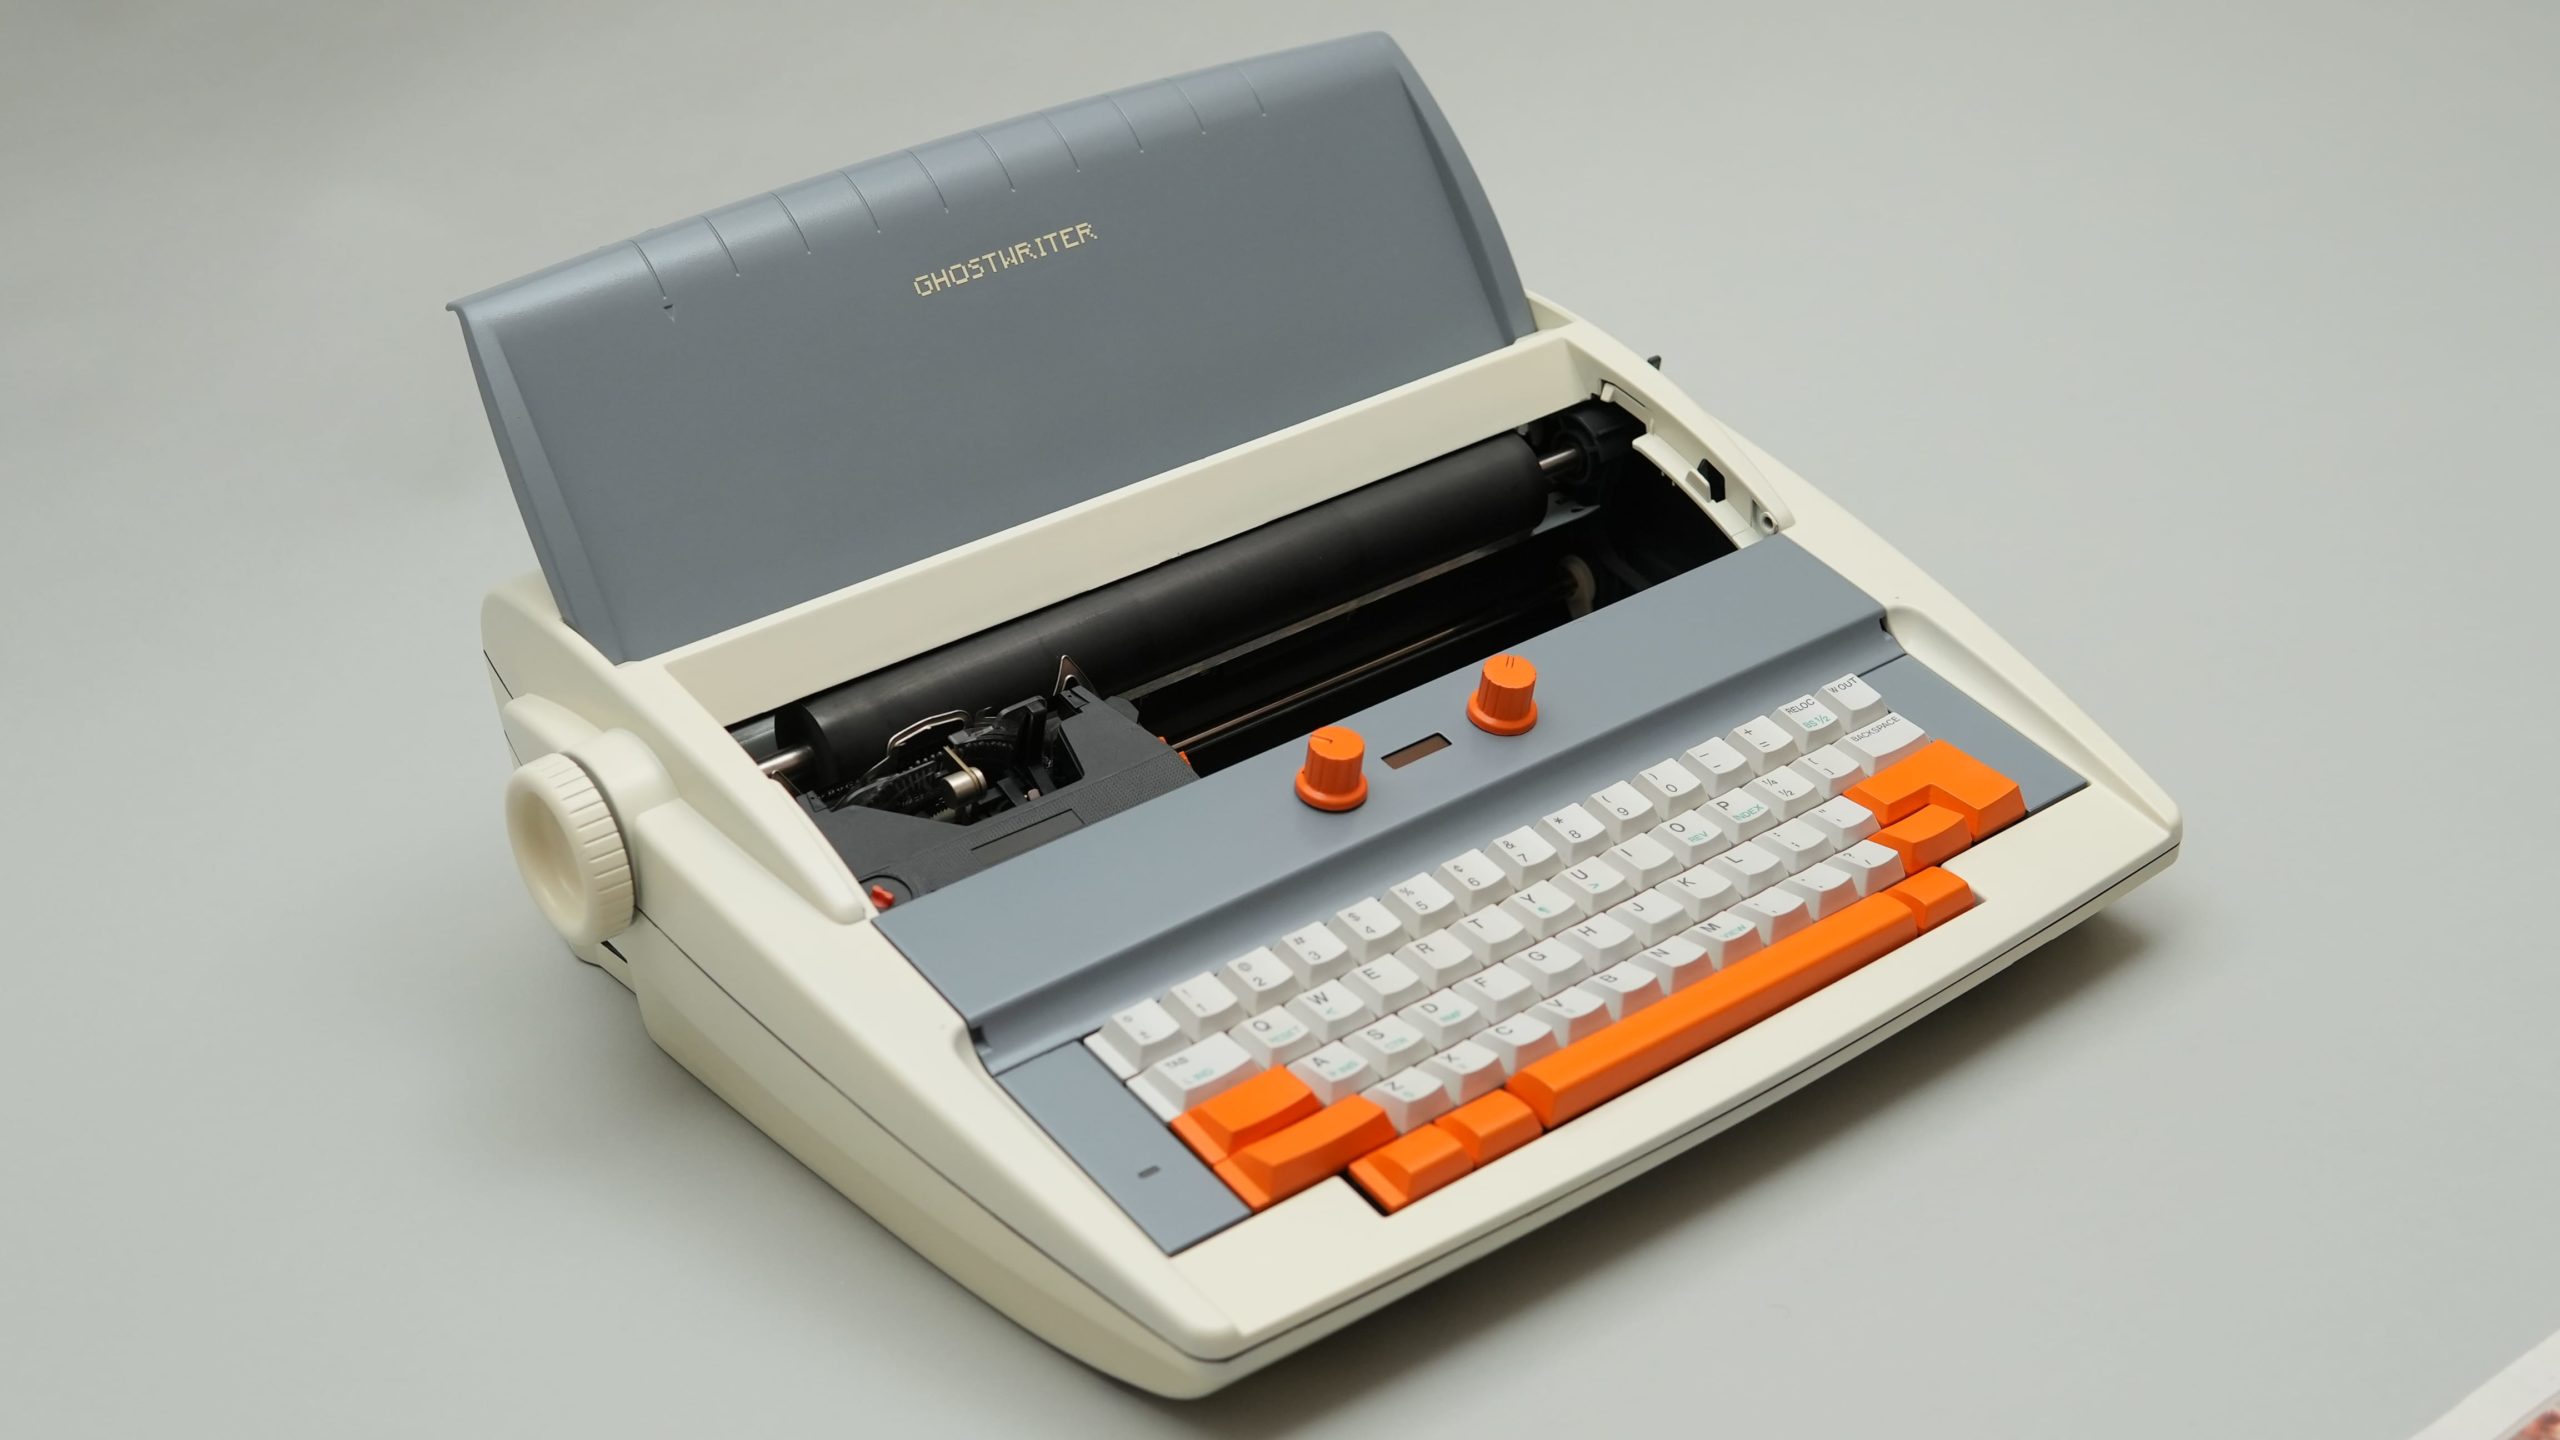 Ghostwriter is a beautiful typewriter with a built-in AI co-author